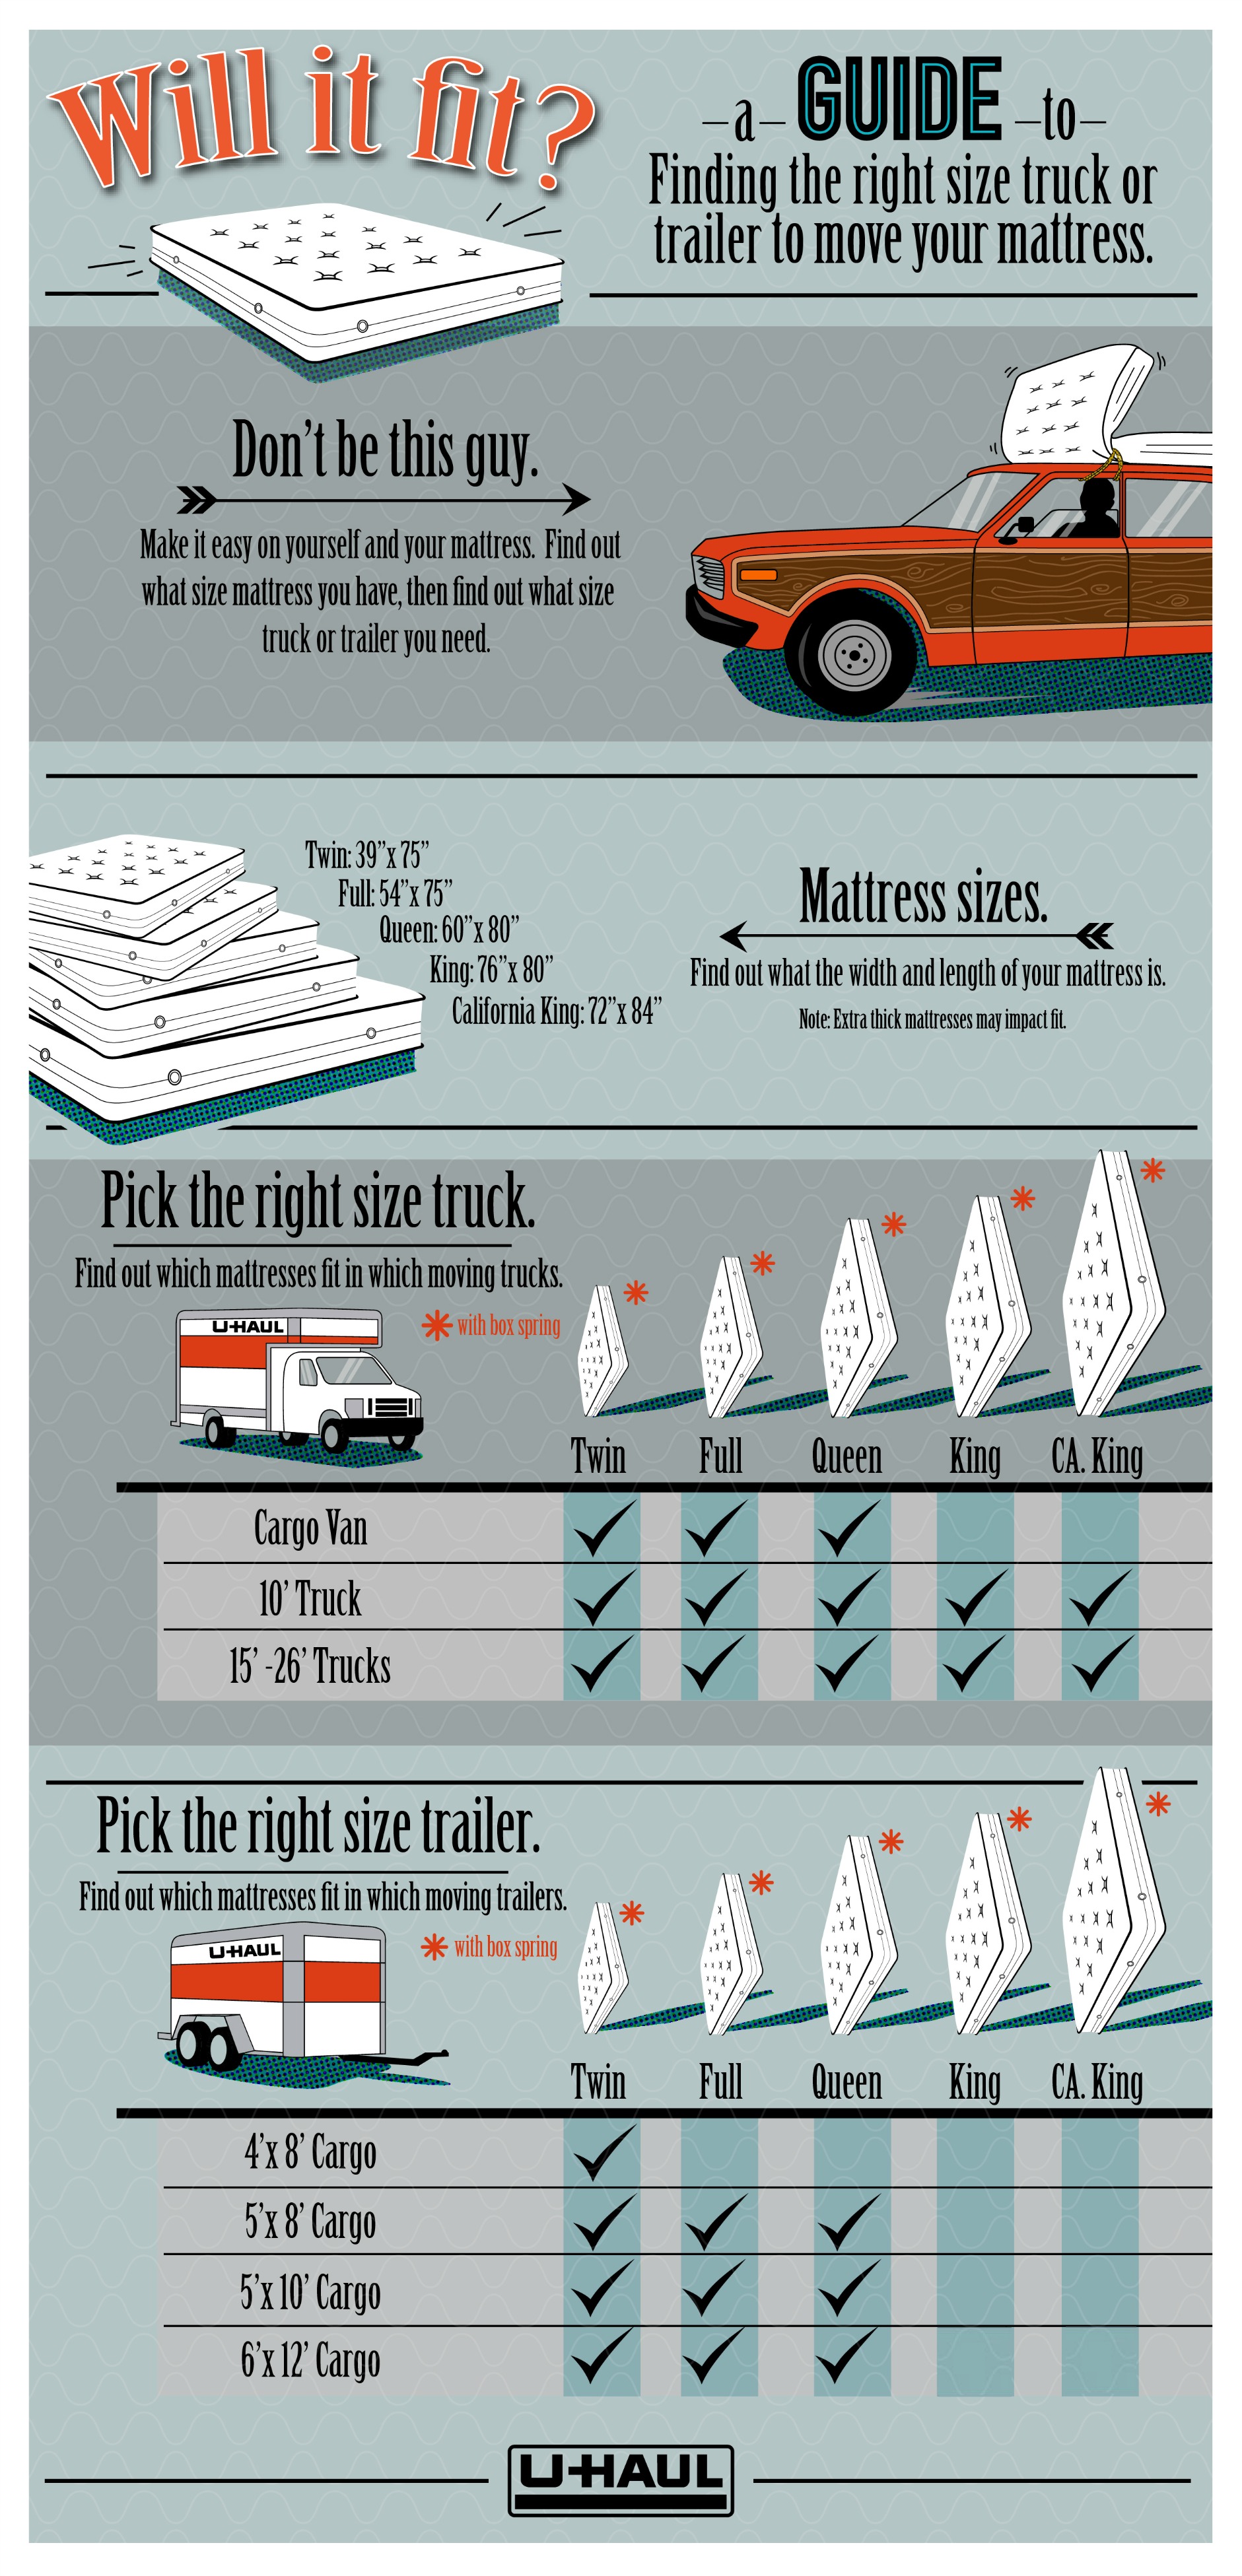 What Cars Can Fit A Queen Size Mattress?